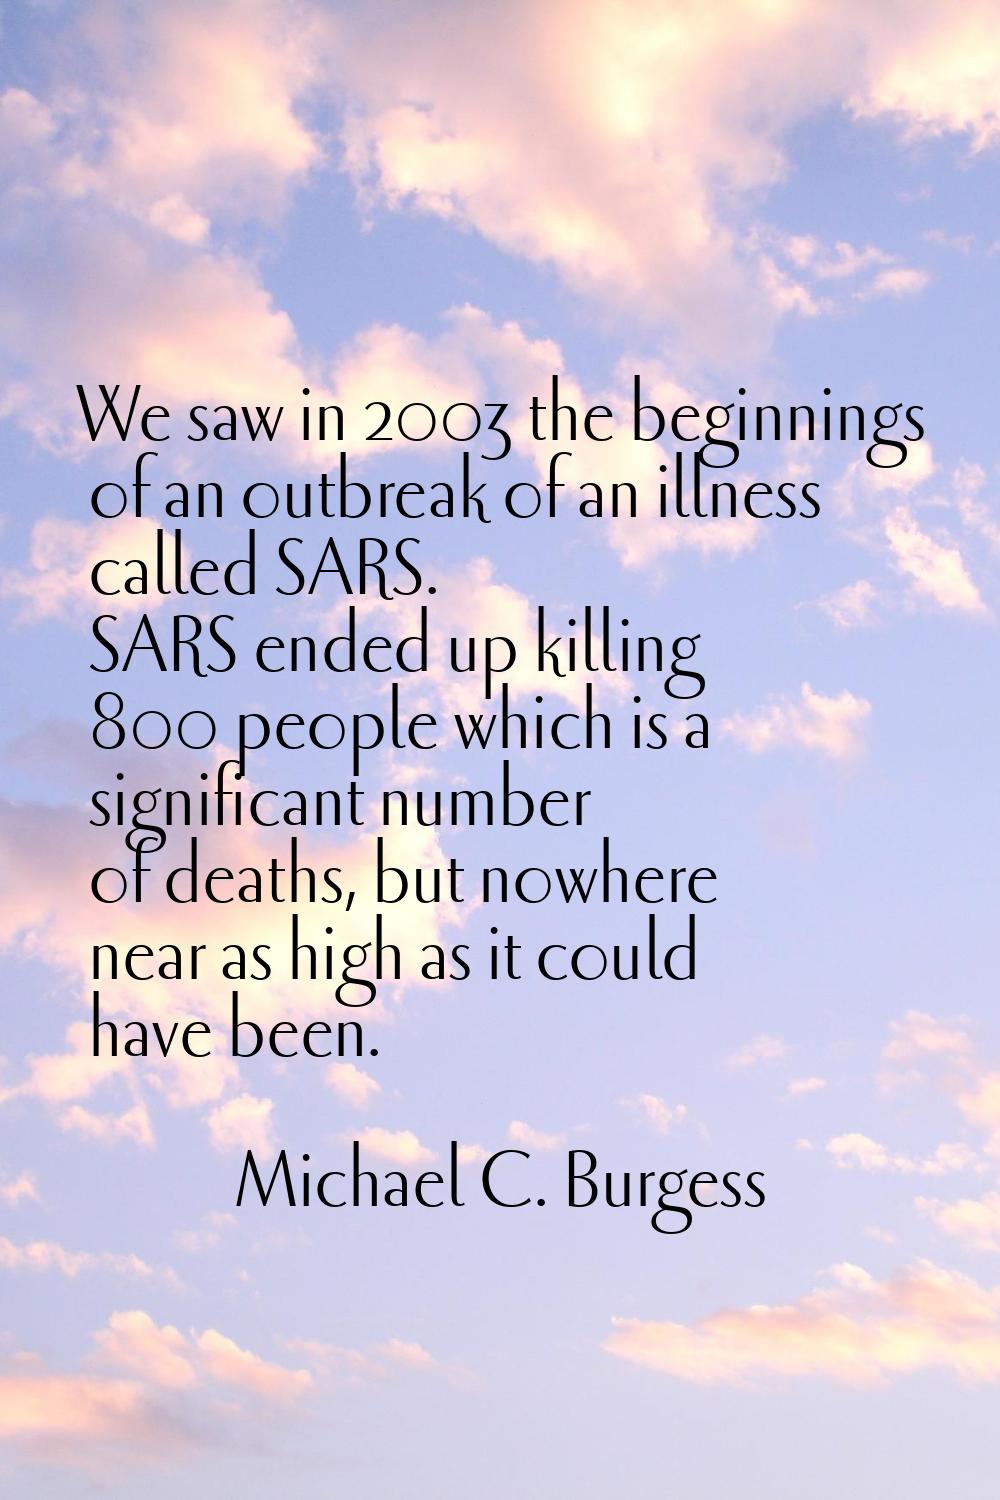 We saw in 2003 the beginnings of an outbreak of an illness called SARS. SARS ended up killing 800 p